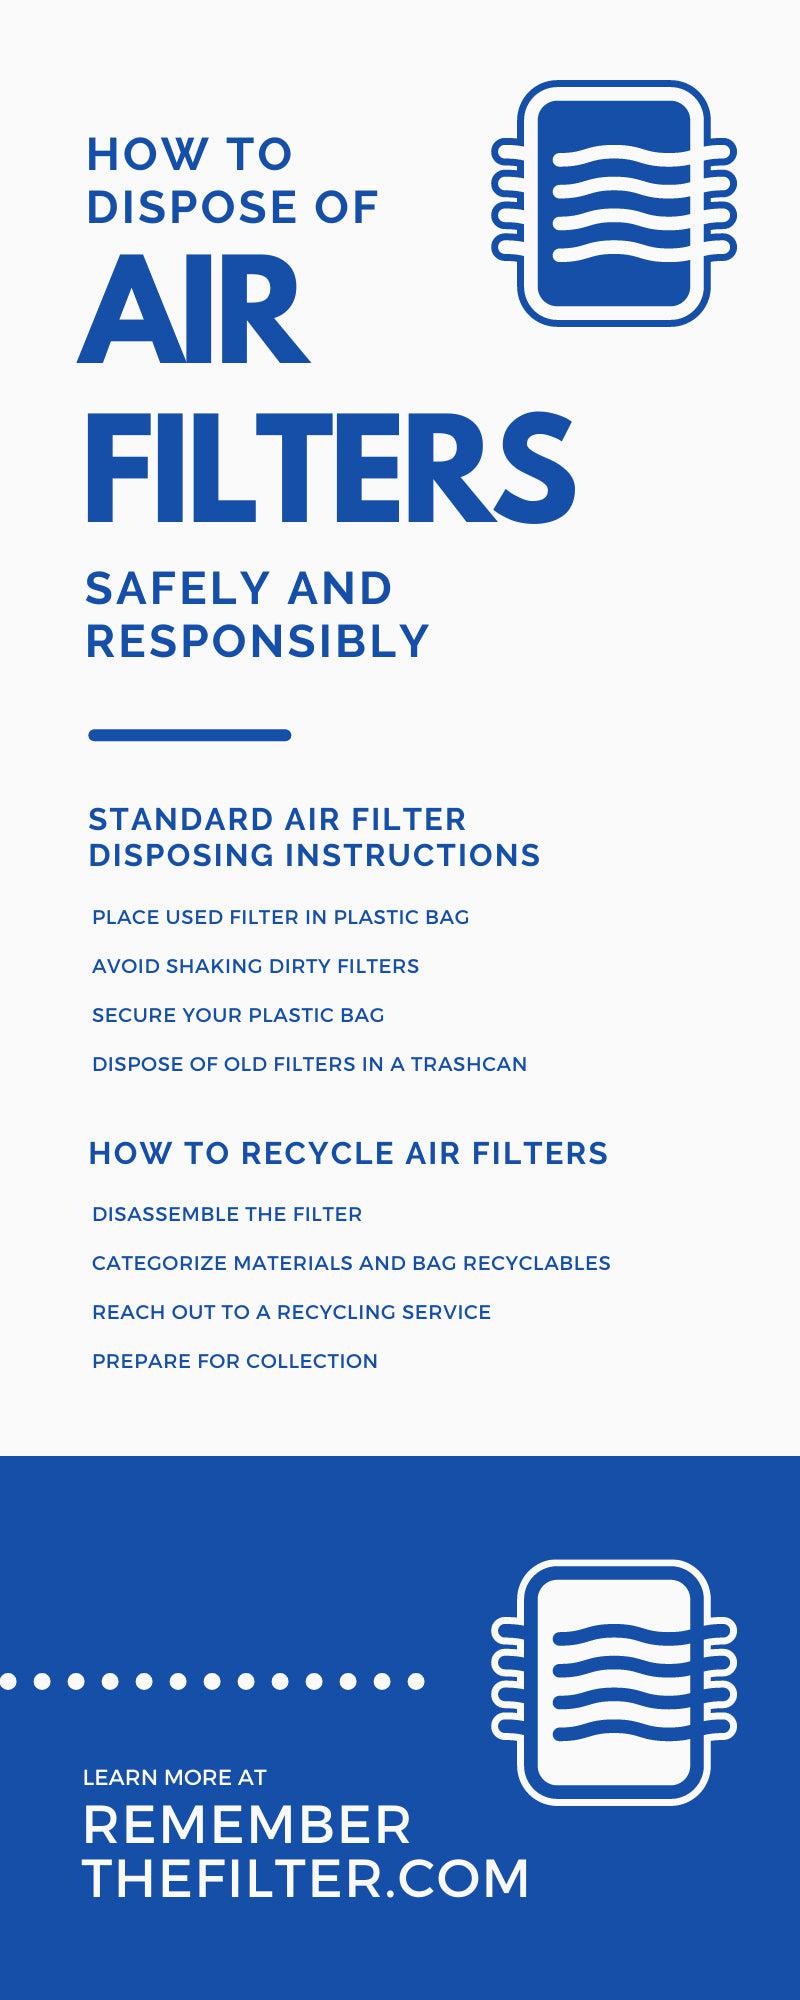 How To Dispose of Air Filters Safely and Responsibly